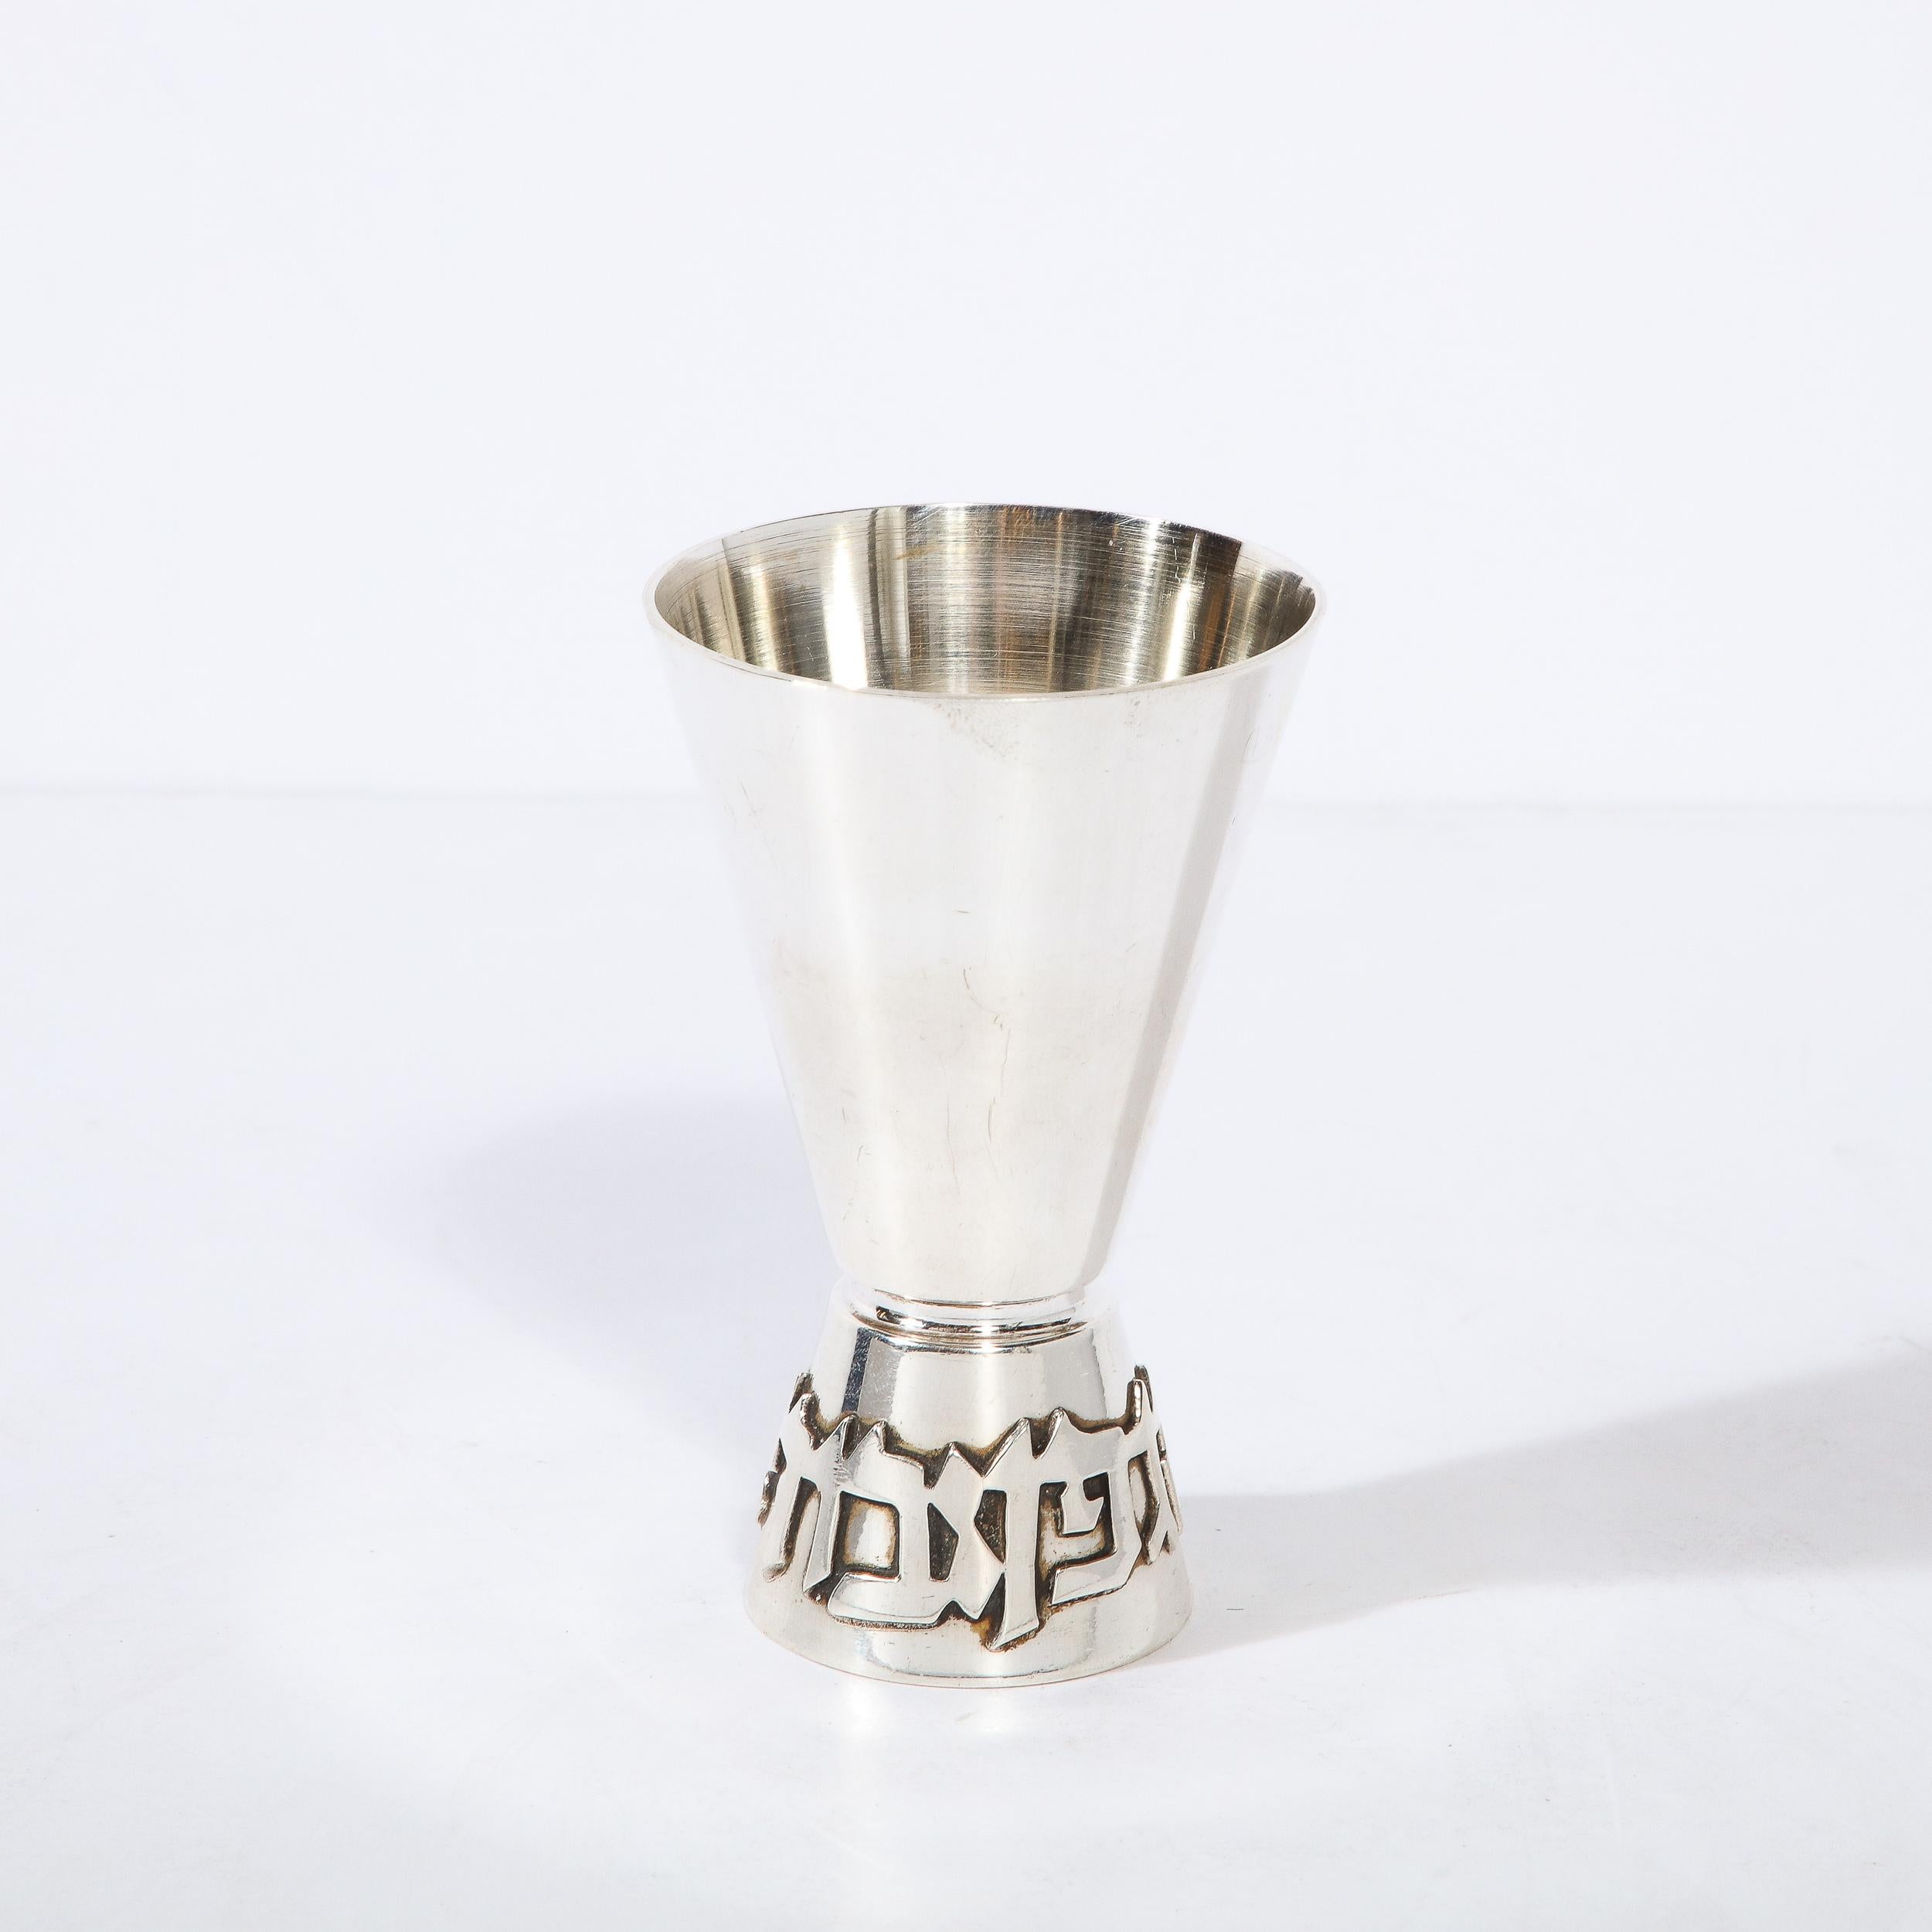 Late 20th Century Sterling Silver Kiddish Cup with Hebrew Lettered Base by Ludwig Wolpert For Sale